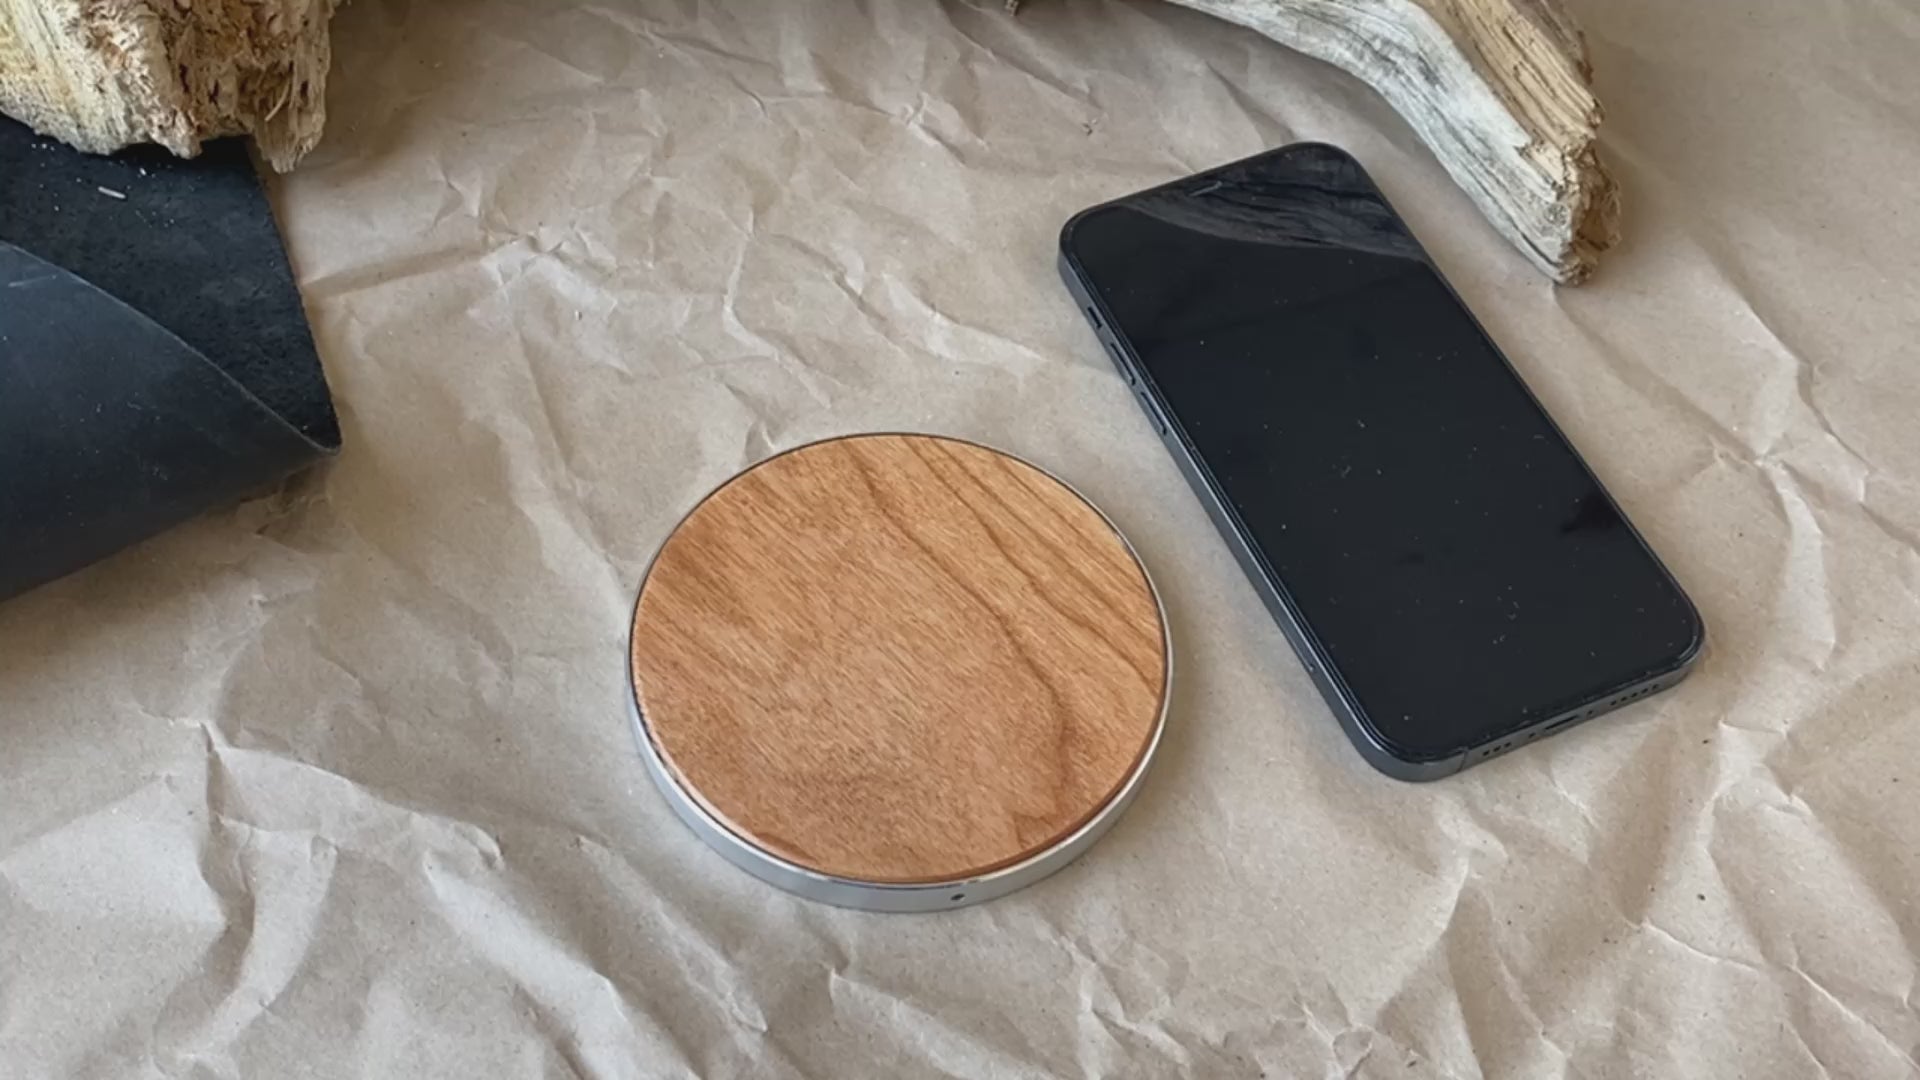 Wireless Fast Charger engraving Bear